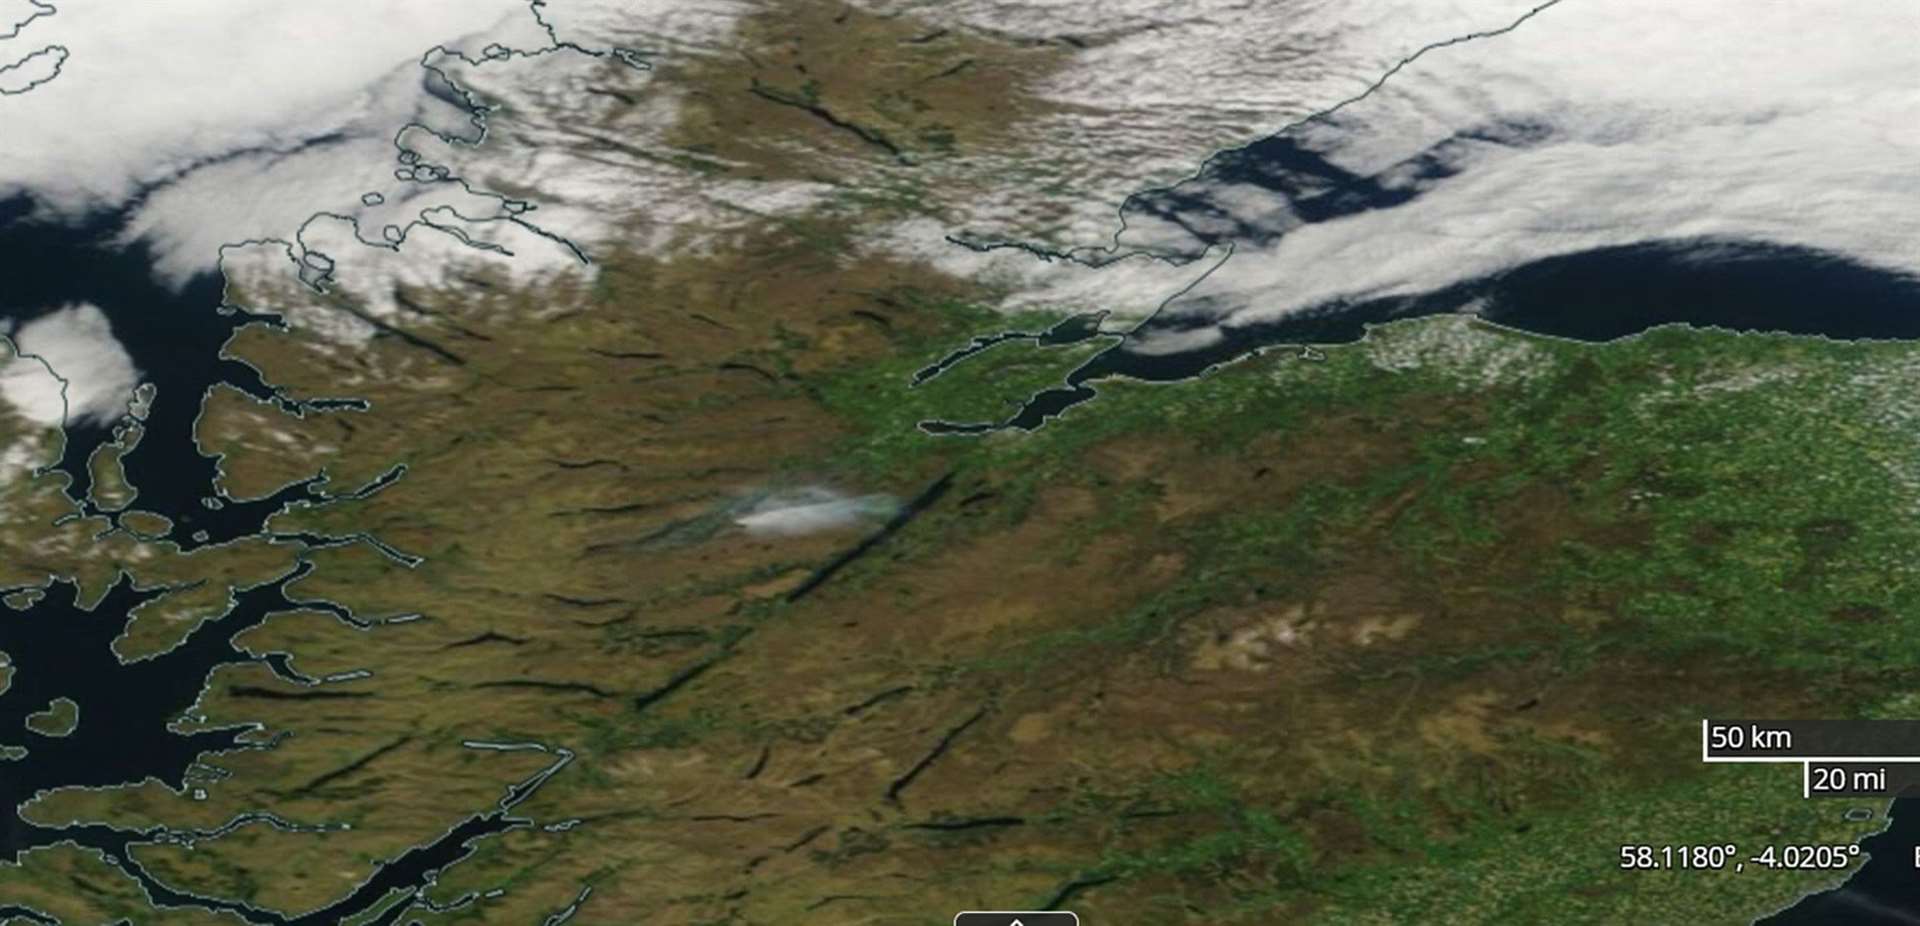 Screenshot from Nasa worldview satellite showing the plume of smoke (centre) from the fire at Cannich, in the hills above Loch Ness in the Highlands, drifting towards the loch on Monday amid clear skies (Nasa/PA)